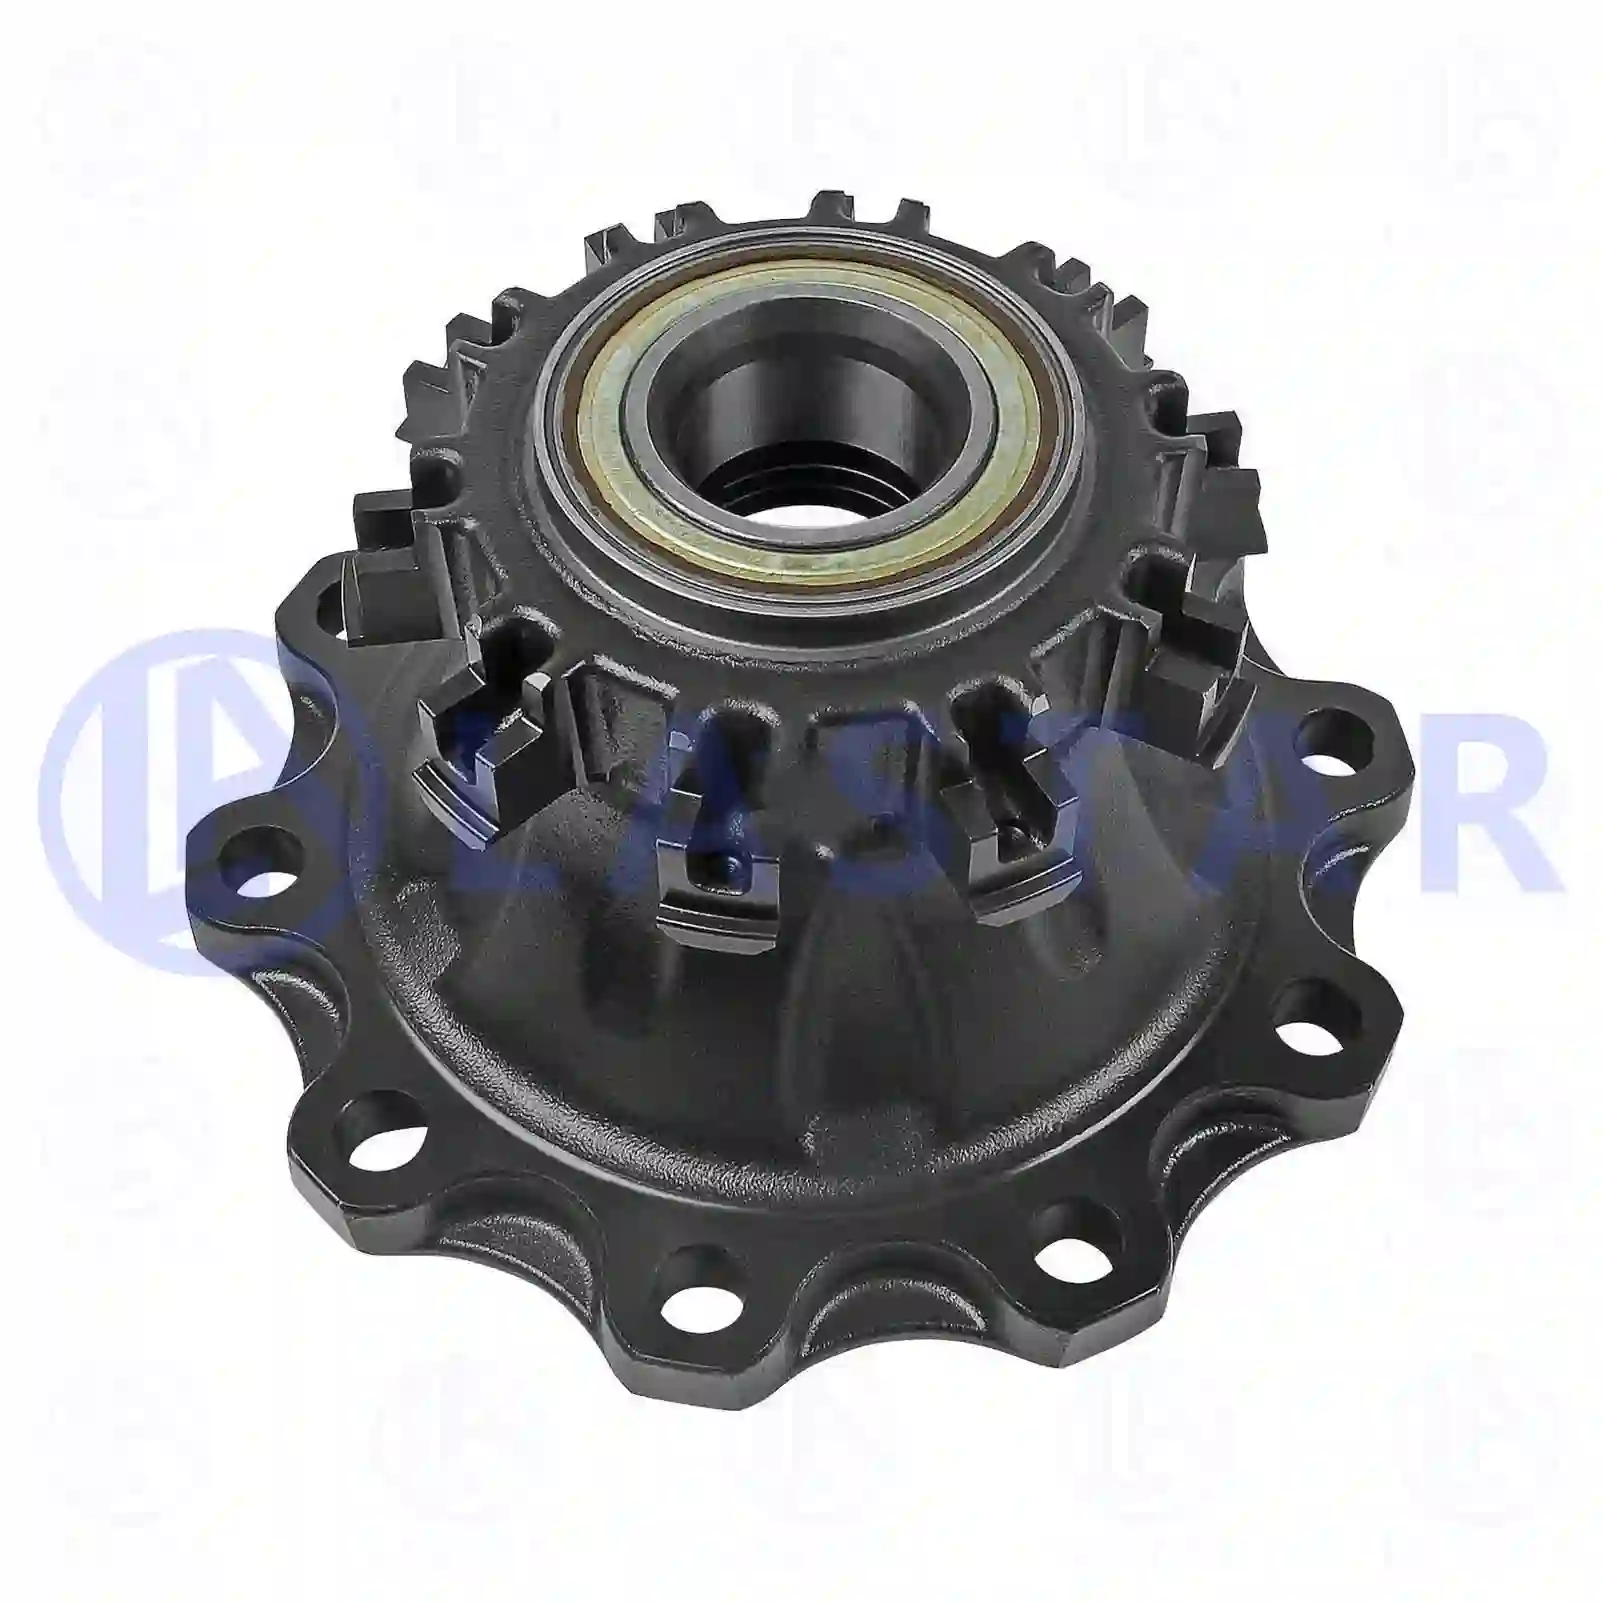 Wheel hub, with bearing, 77726487, 1388905, 1391615, 1697346, 1697346A, 1697346R, ZG30212-0008, , , ||  77726487 Lastar Spare Part | Truck Spare Parts, Auotomotive Spare Parts Wheel hub, with bearing, 77726487, 1388905, 1391615, 1697346, 1697346A, 1697346R, ZG30212-0008, , , ||  77726487 Lastar Spare Part | Truck Spare Parts, Auotomotive Spare Parts